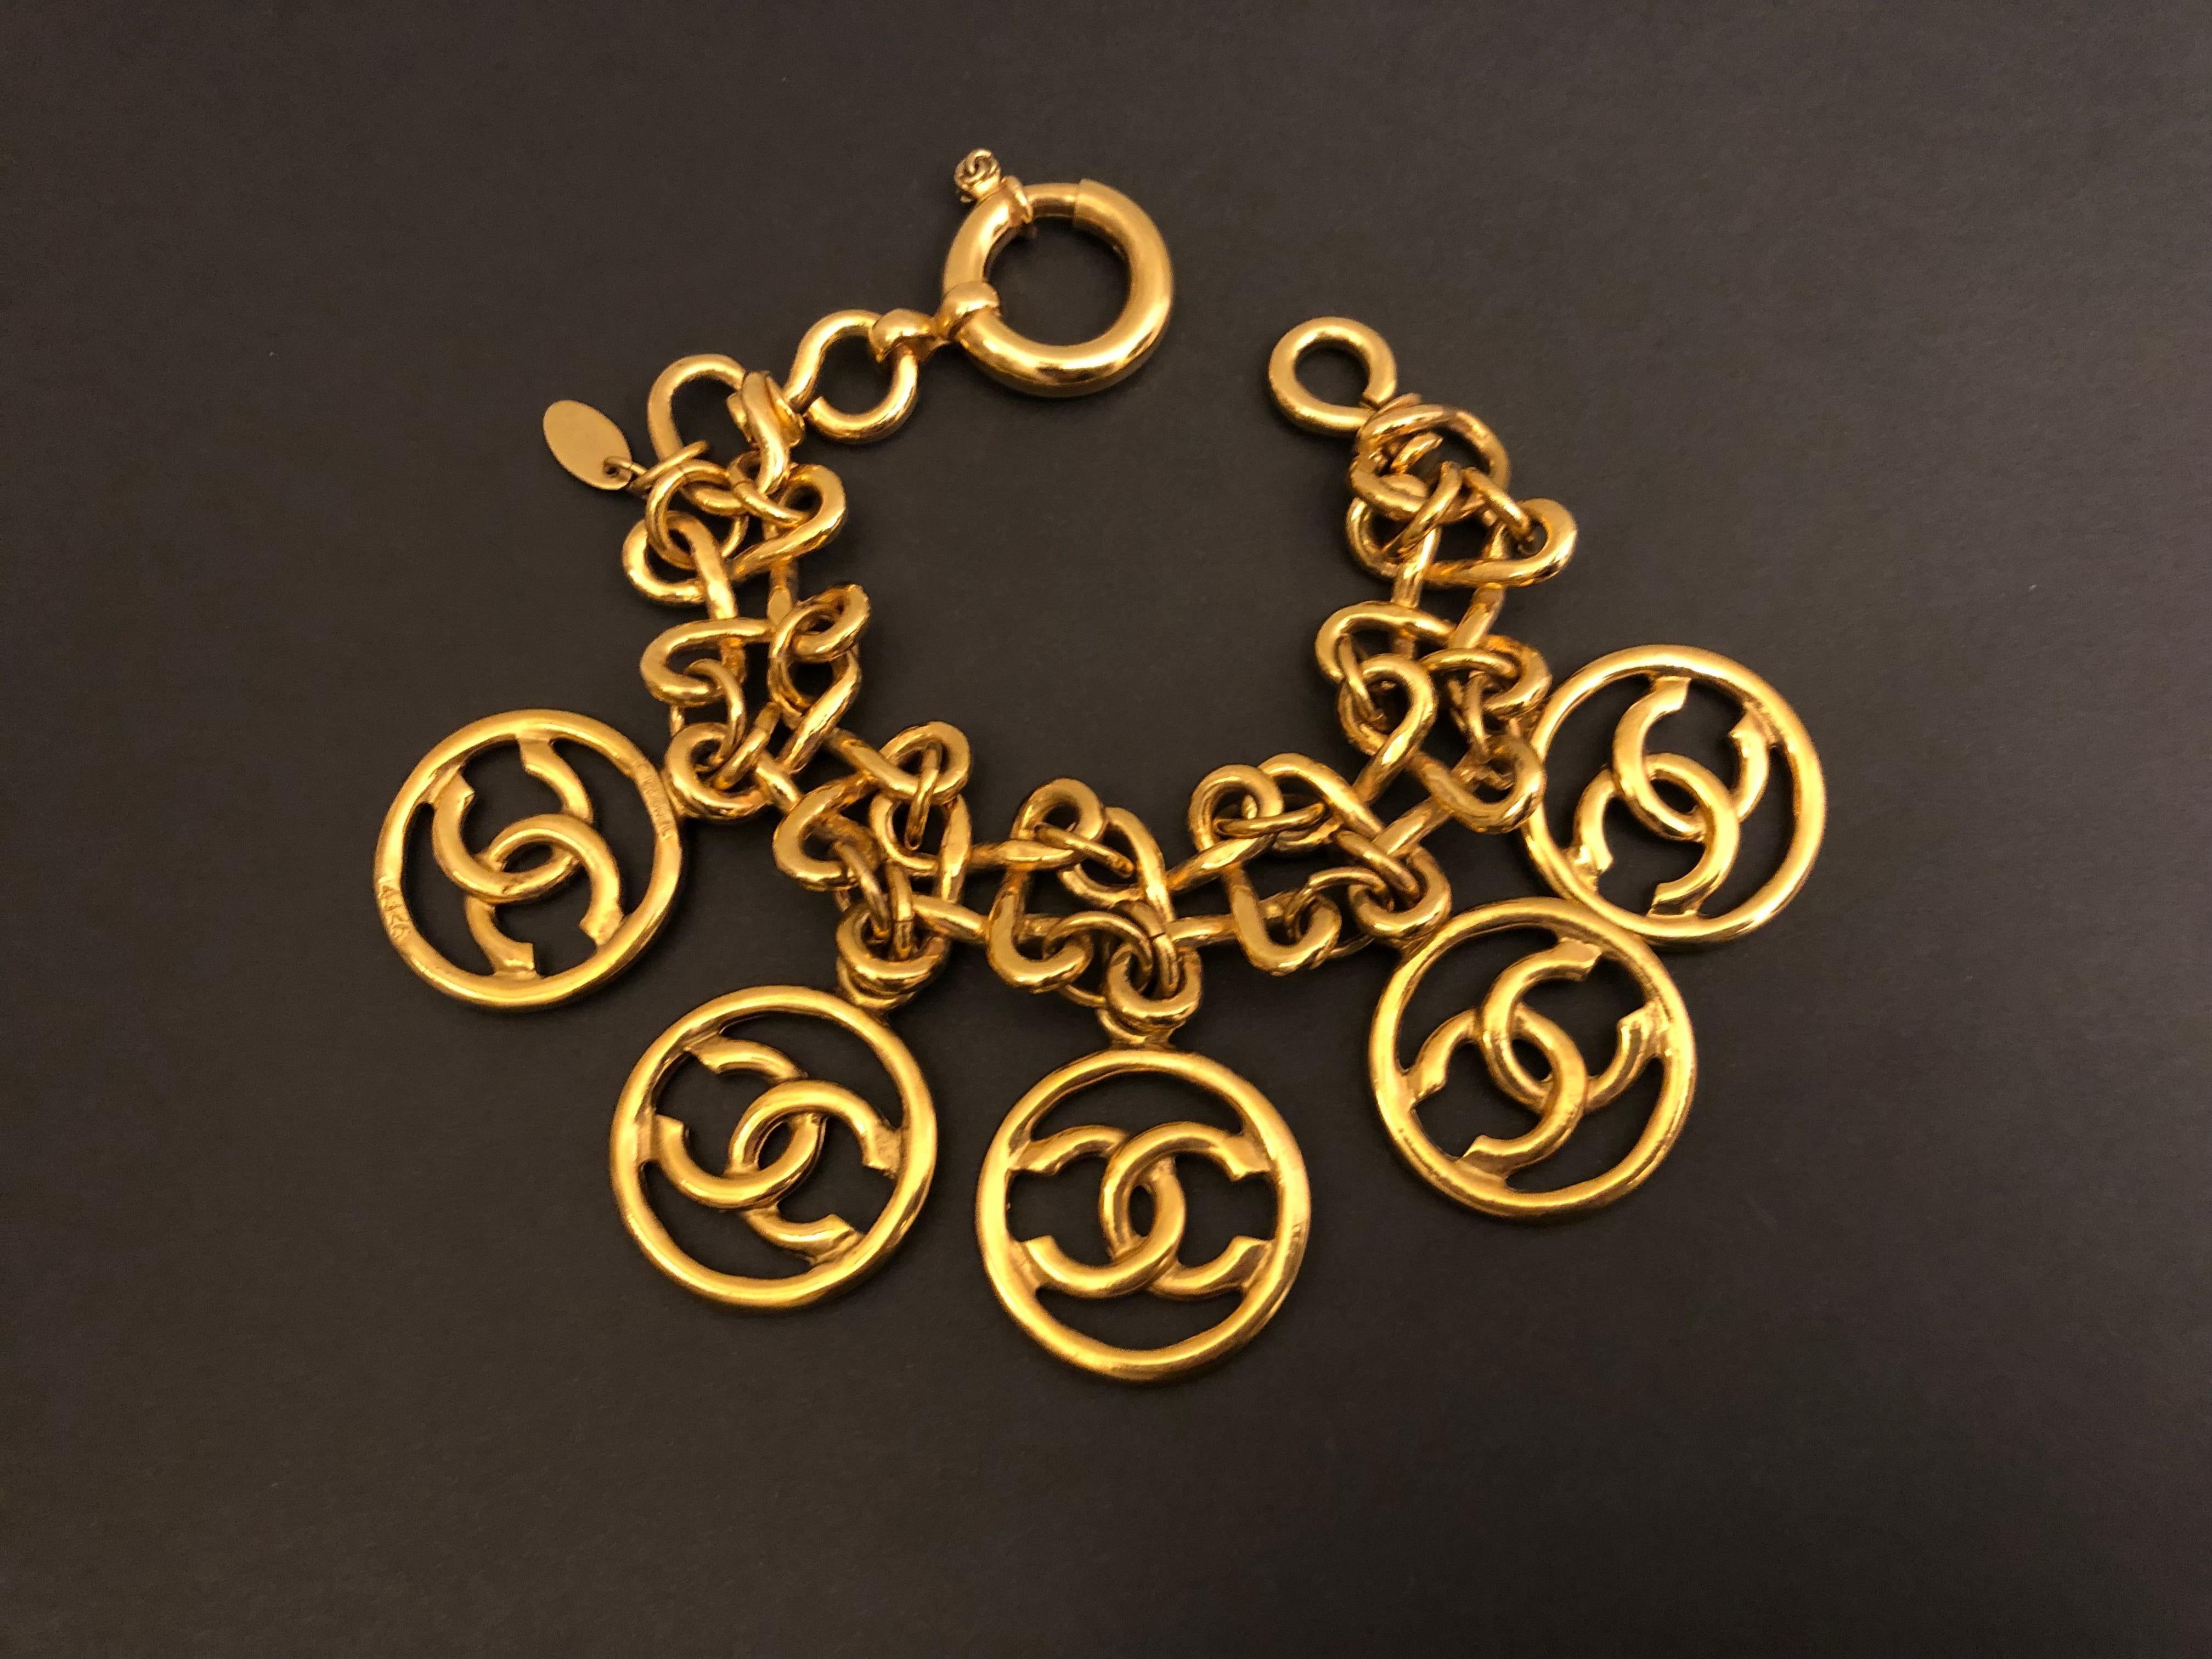 Vintage Chanel gold toned bracelet in clover links adorned with five CC charms. Absolutely a rare piece to add to your vintage collection. Length measures approximately 20 cm. Stamped 93P made in France. Comes with box.

Condition: In excellent